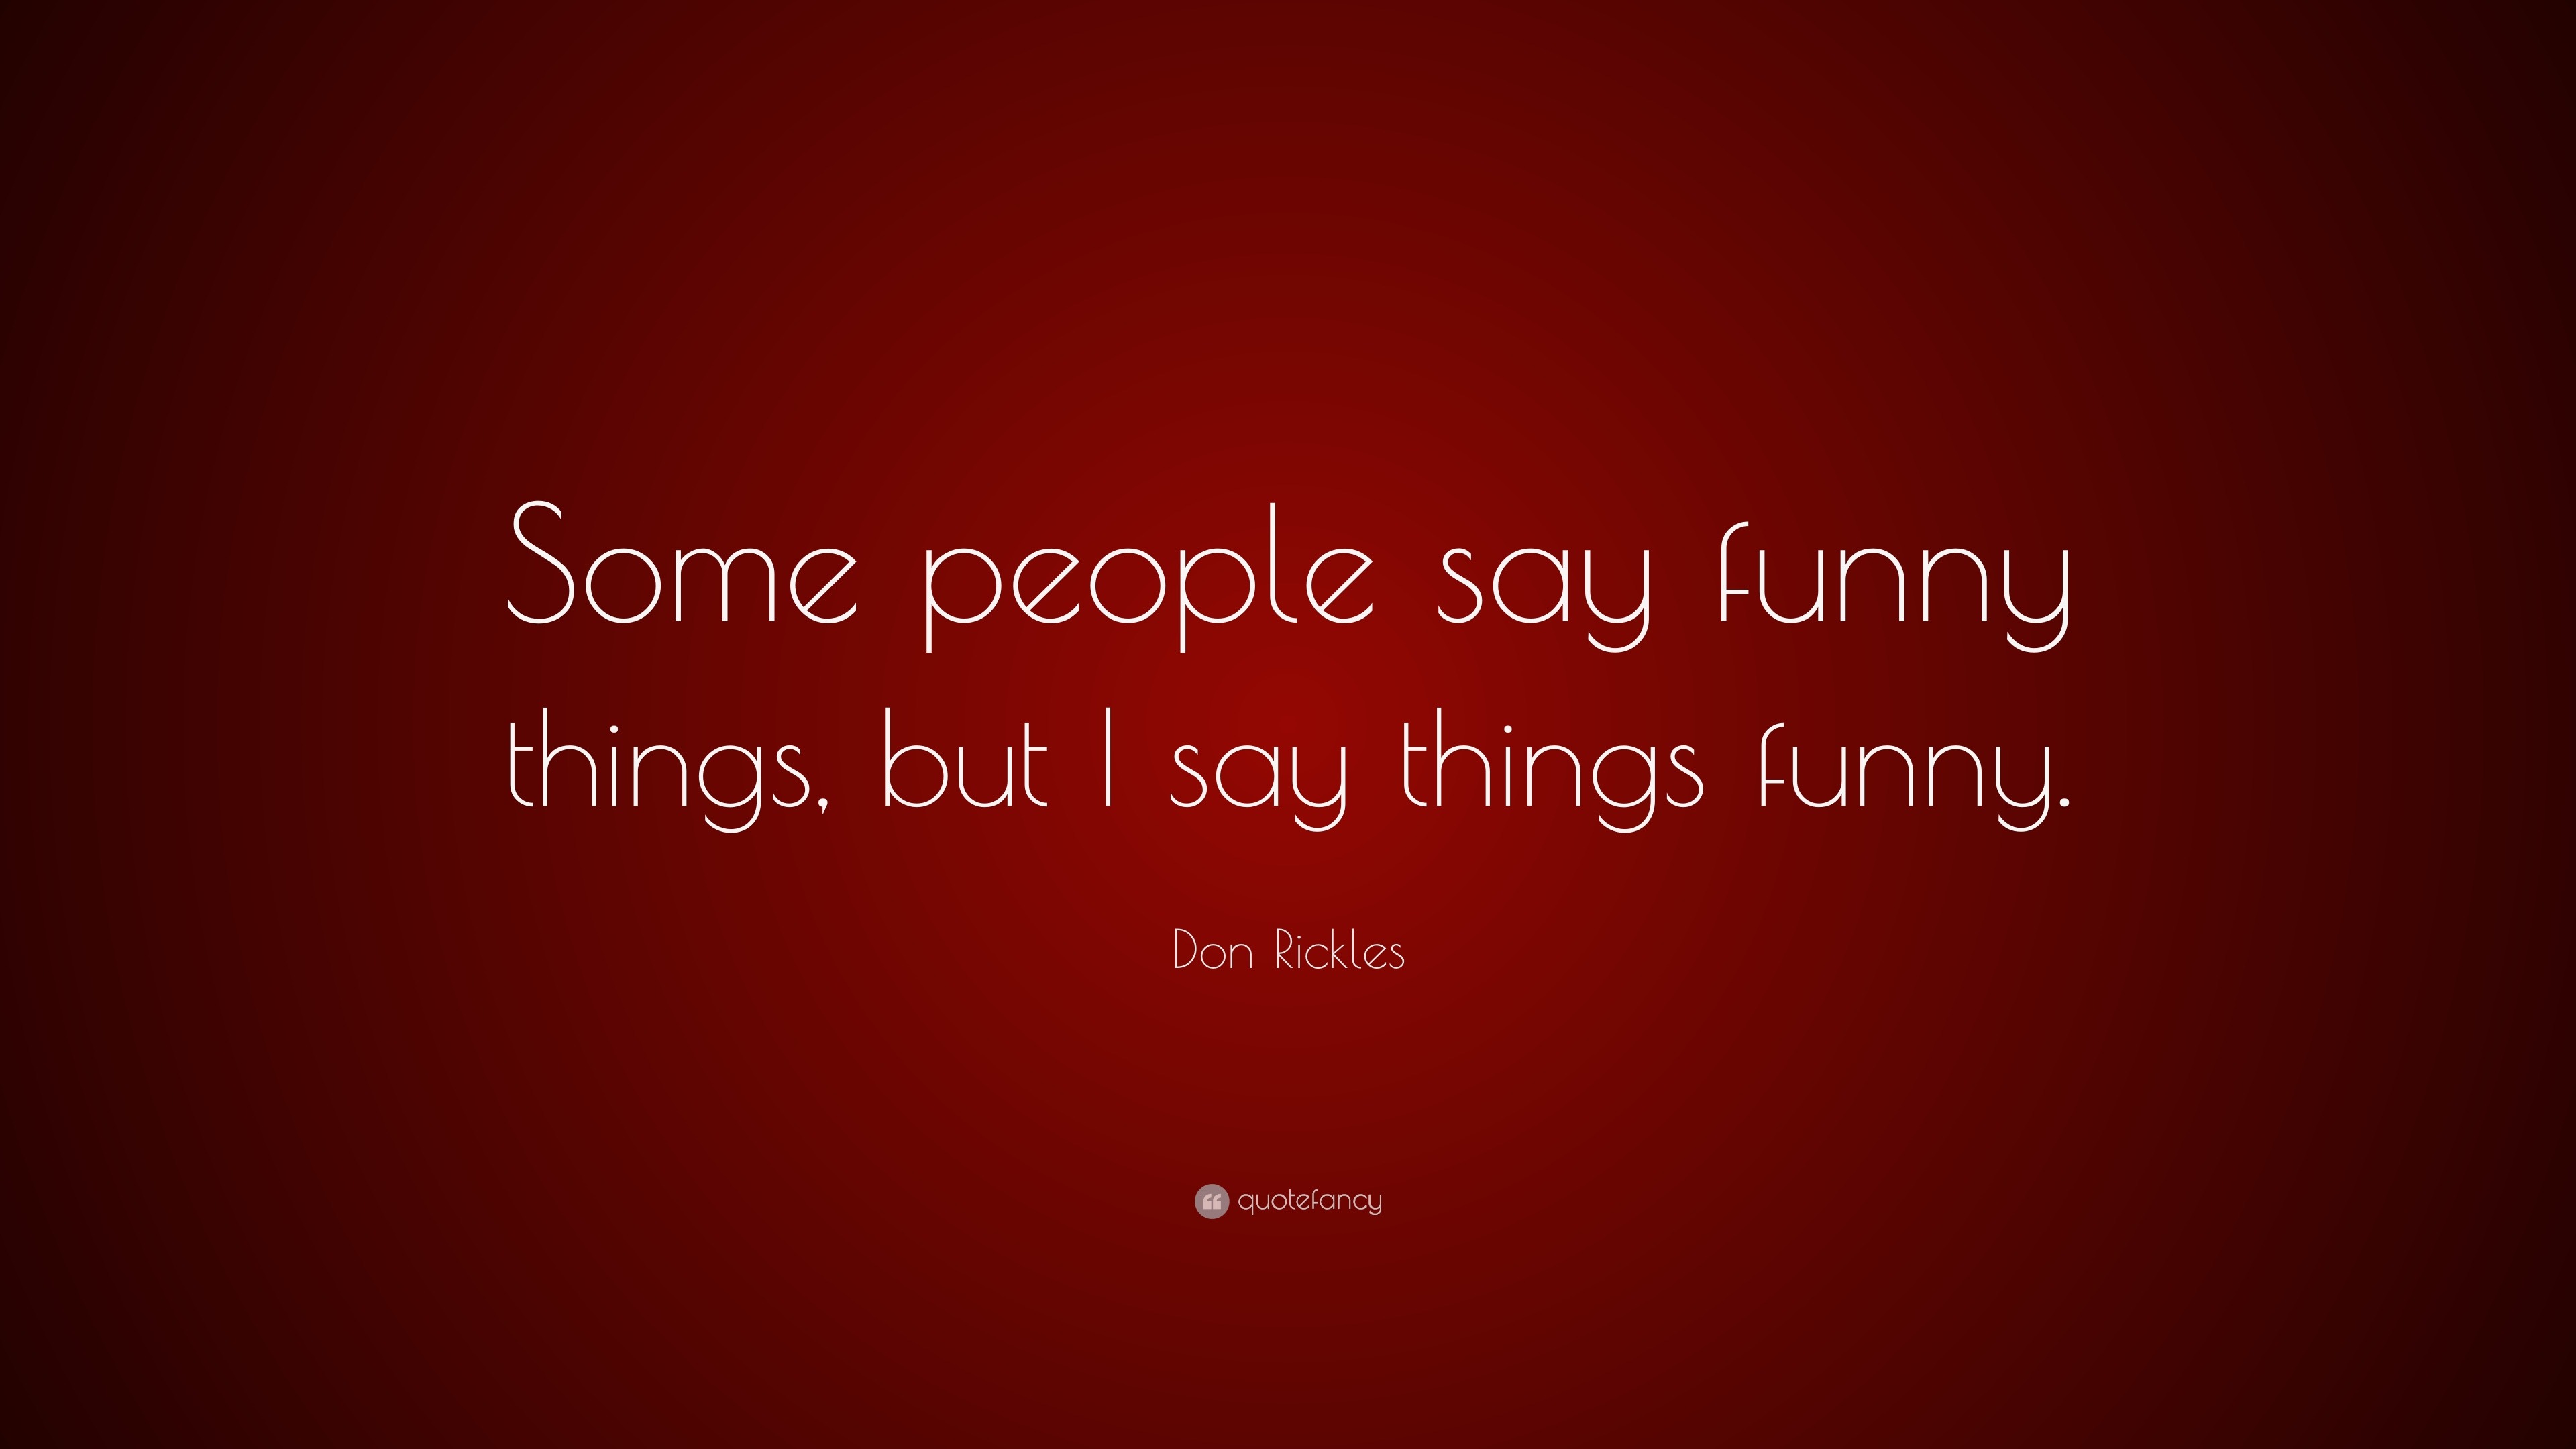 Don Rickles Quote: “Some people say funny things, but I say things funny.”